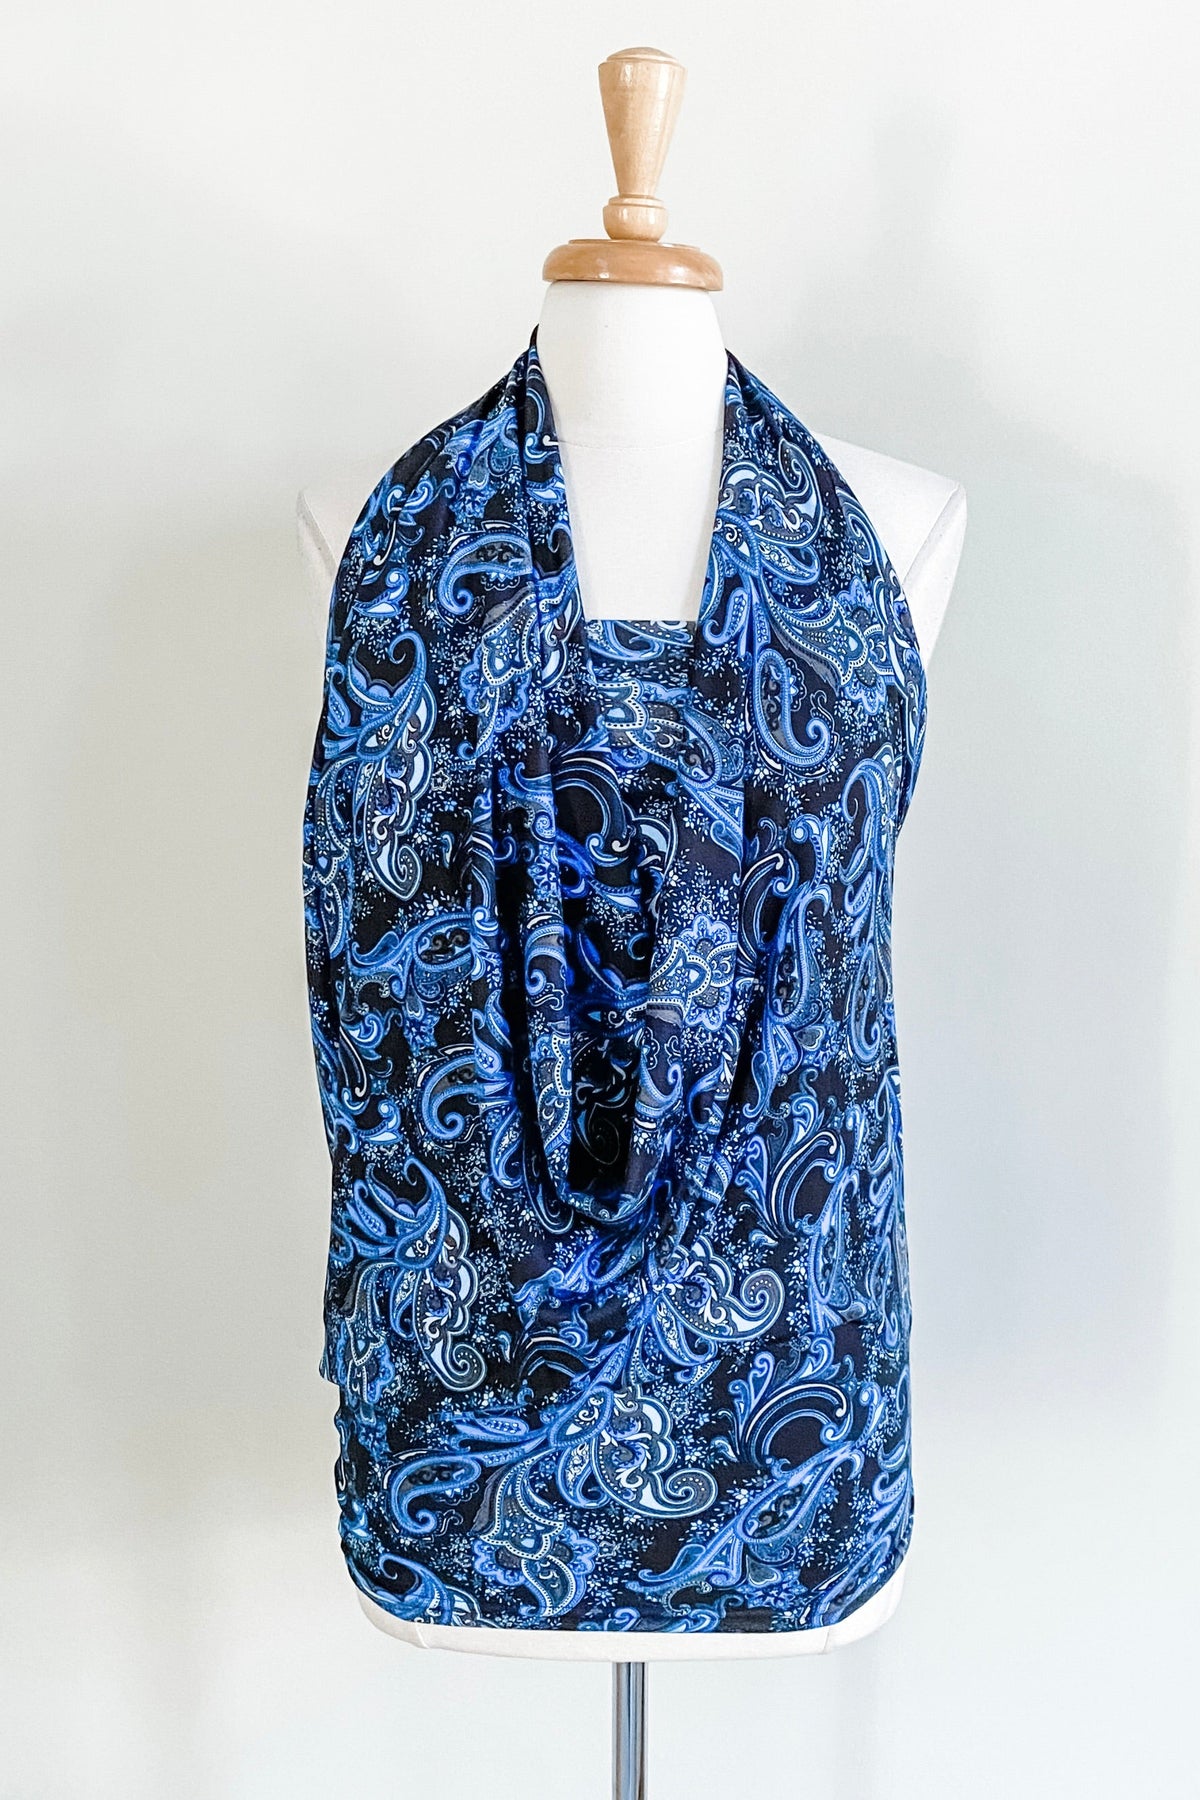 Diane Kroe Origami Dress (Blue Paisley) - The Classic Capsule Collection